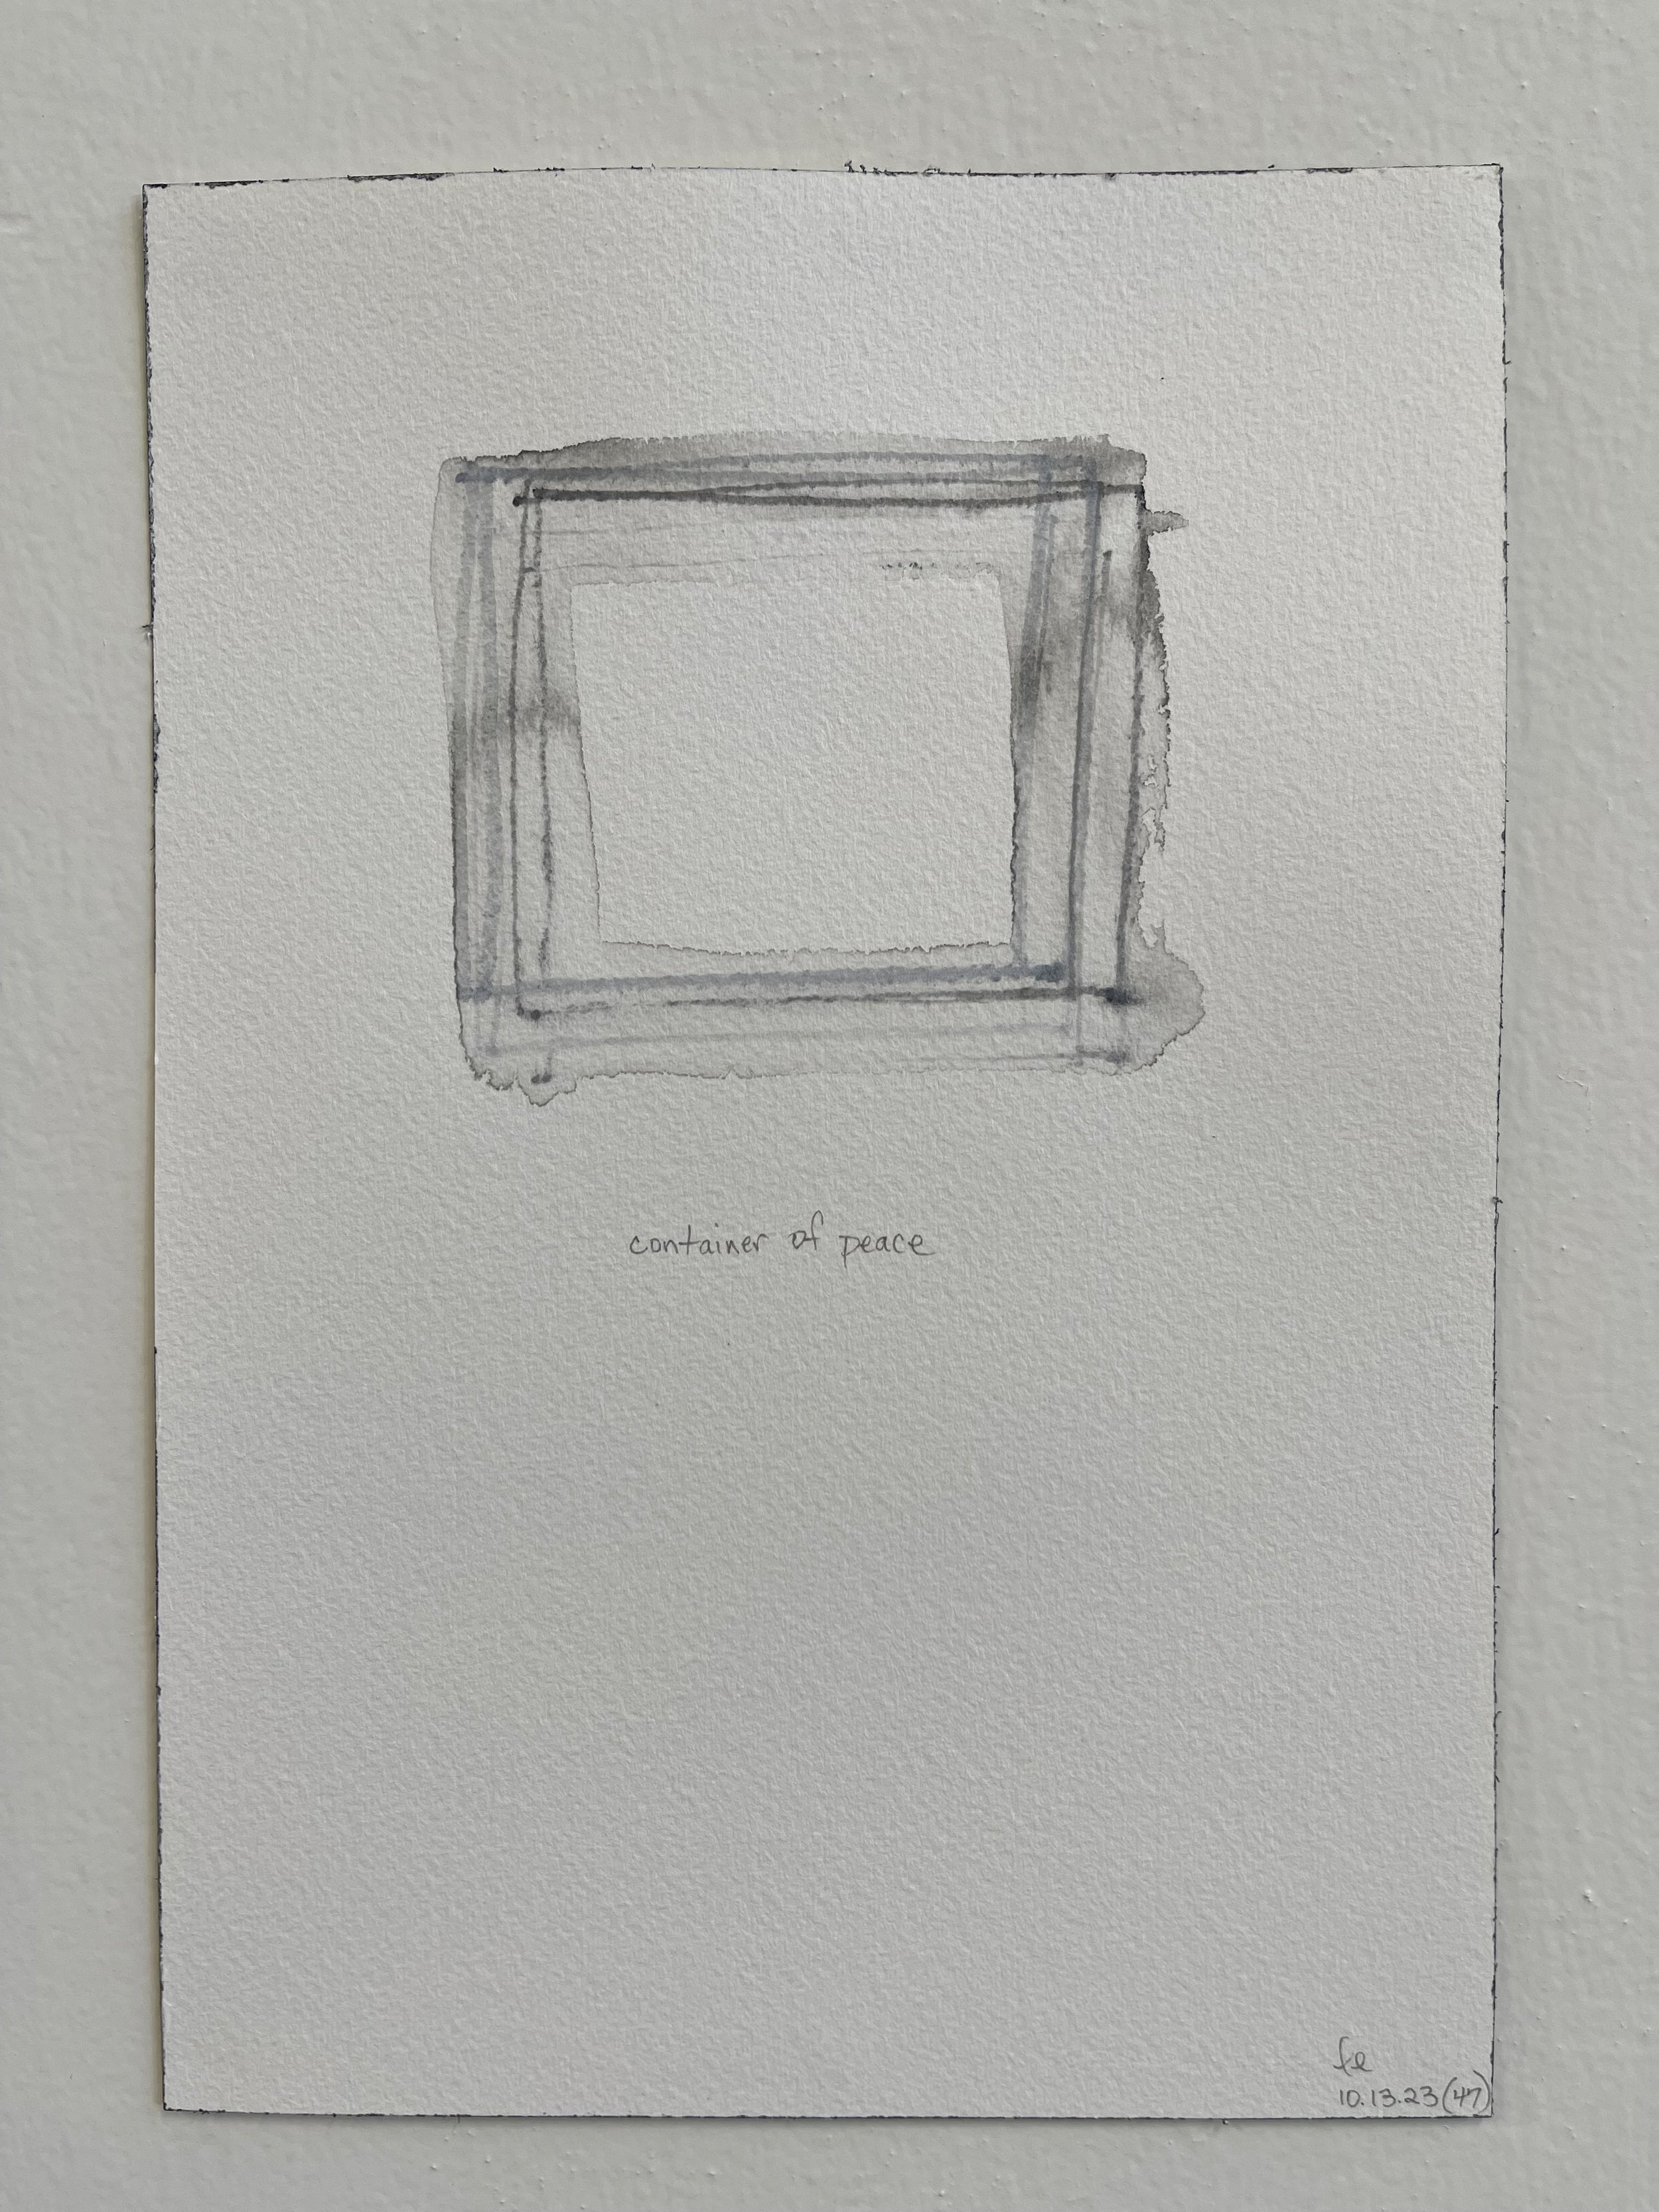 container of peace (47), 2023 | watercolor pencil on Arches paper | 7" x 10" | Private Collection, Oakland, CA